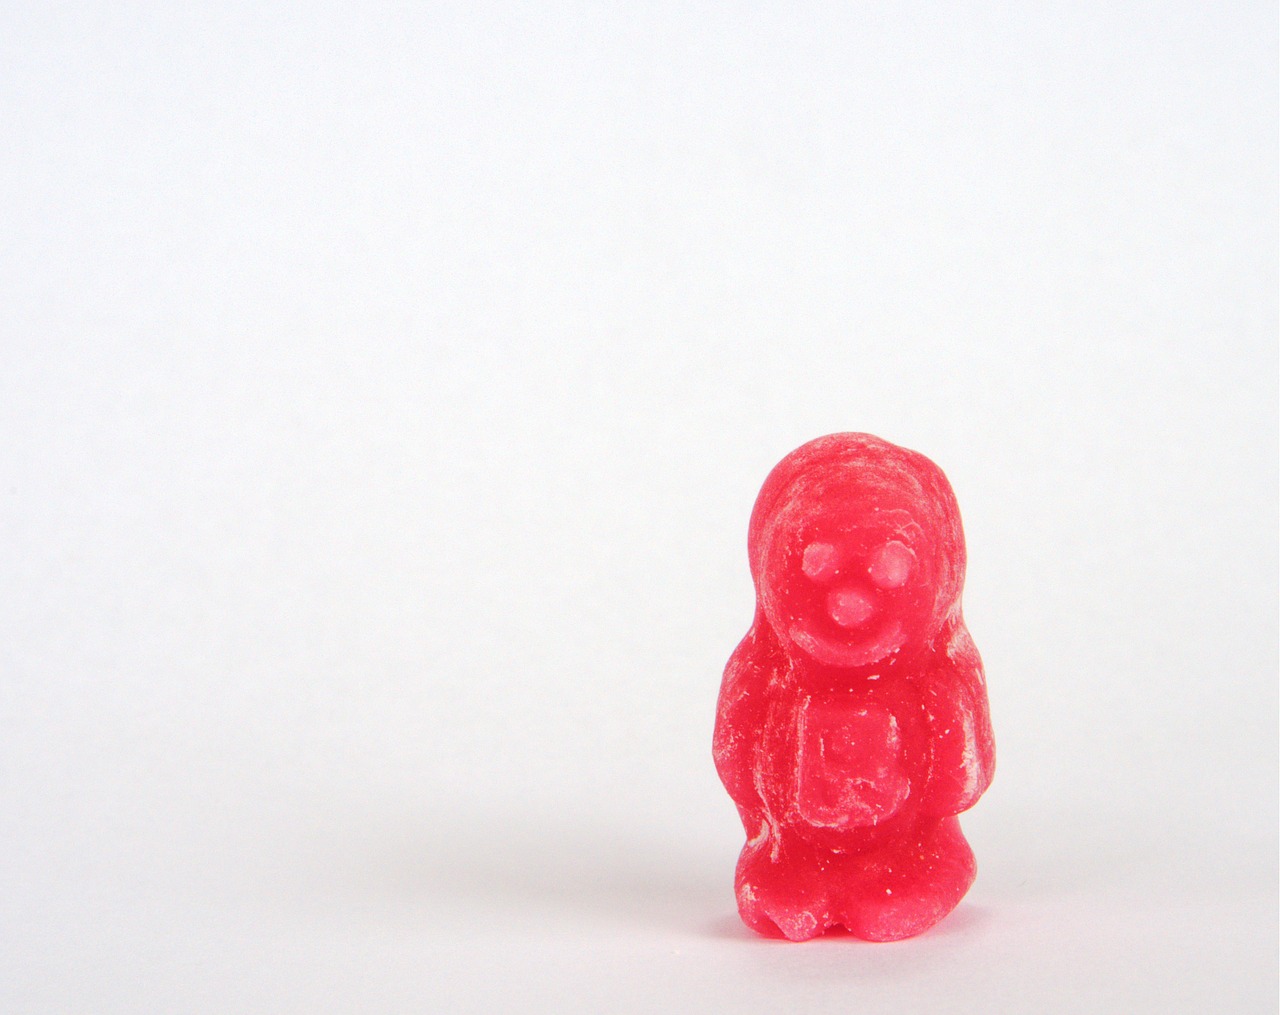 jelly baby sweets free photo